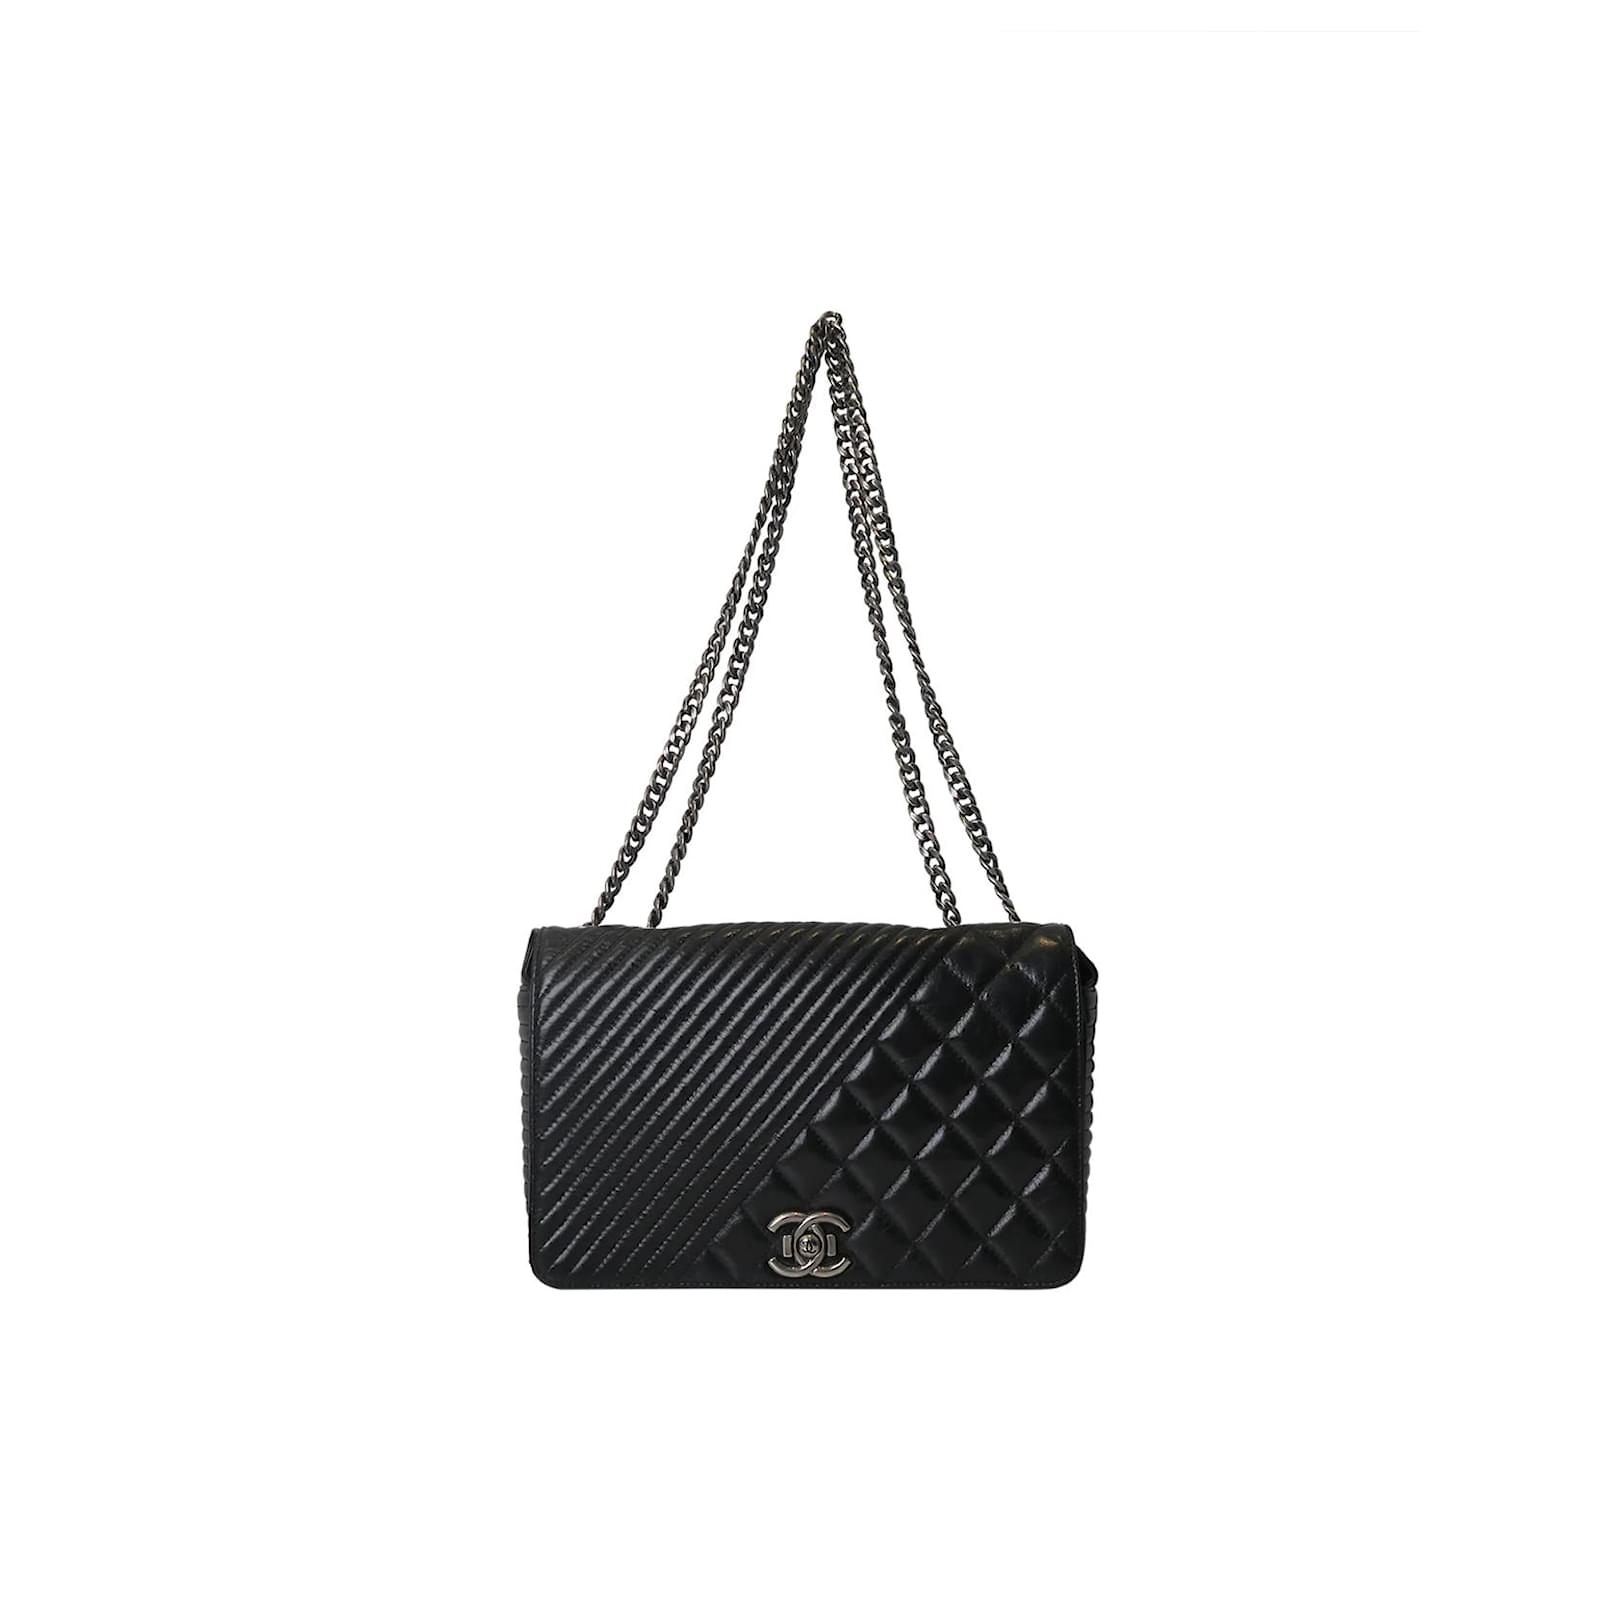 Chanel CHANEL Patent Quilted Medium Coco Boy Flap. Black Patent